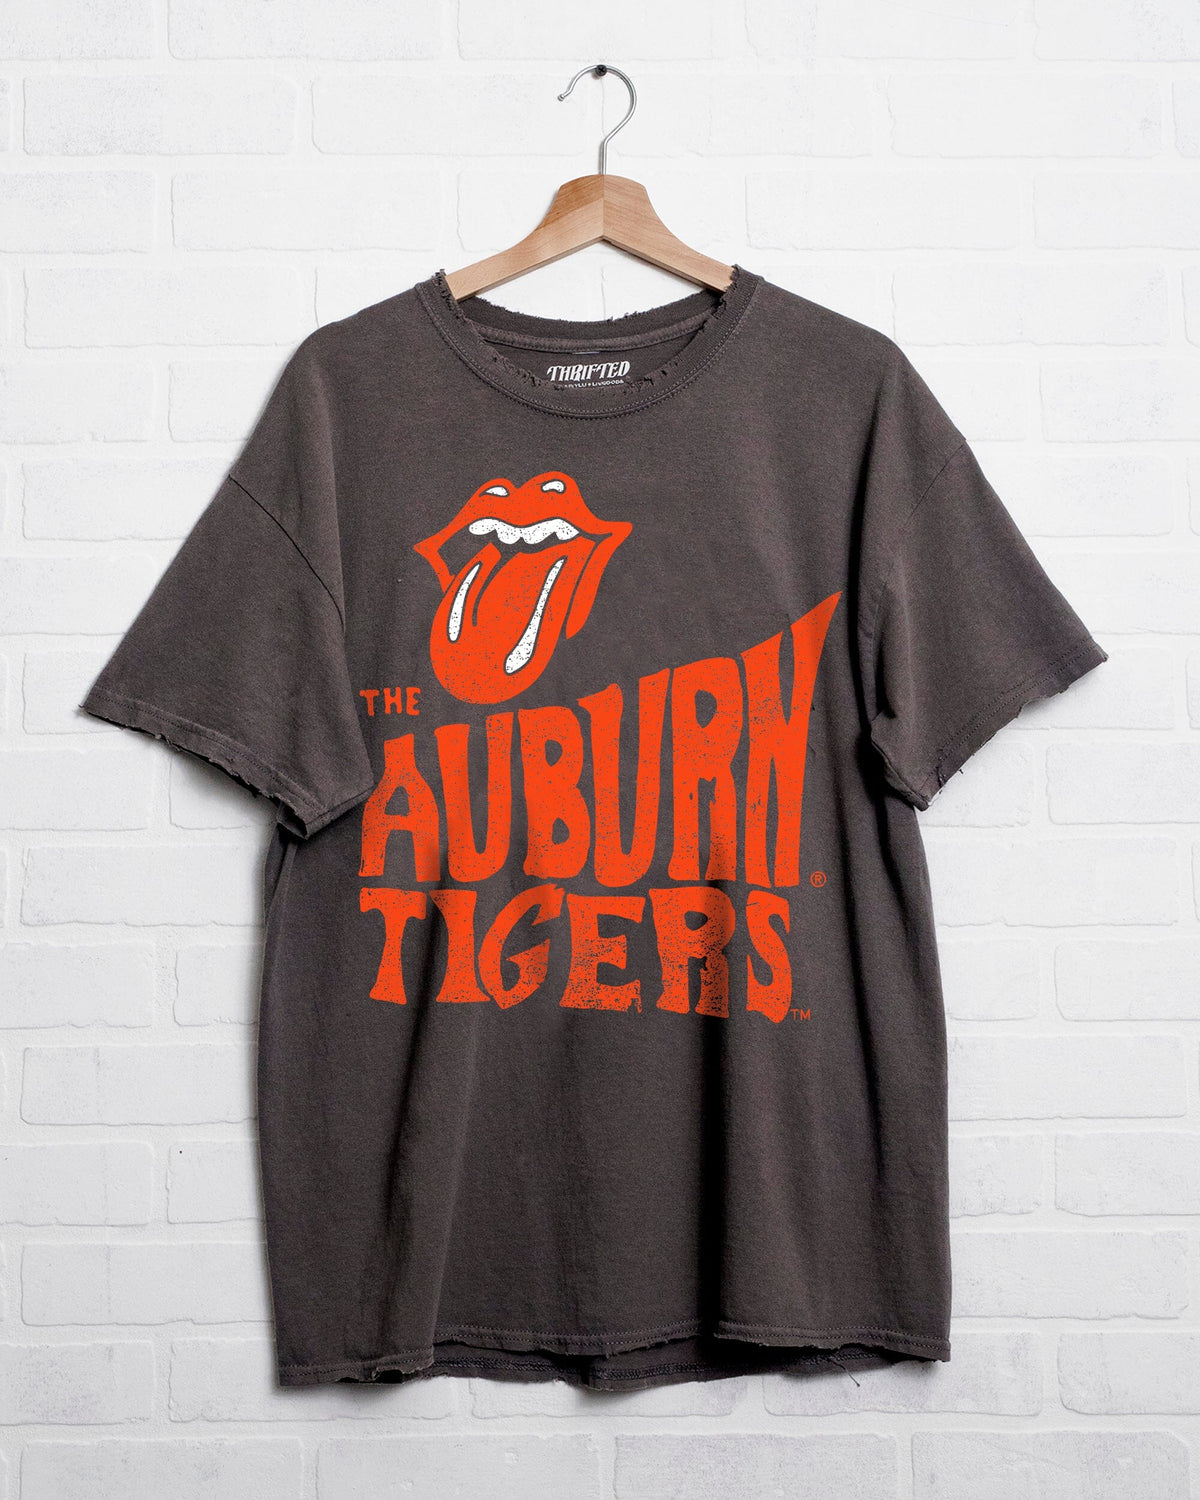 Rolling Stones Auburn Tigers Dazed Charcoal Thrifted Tee